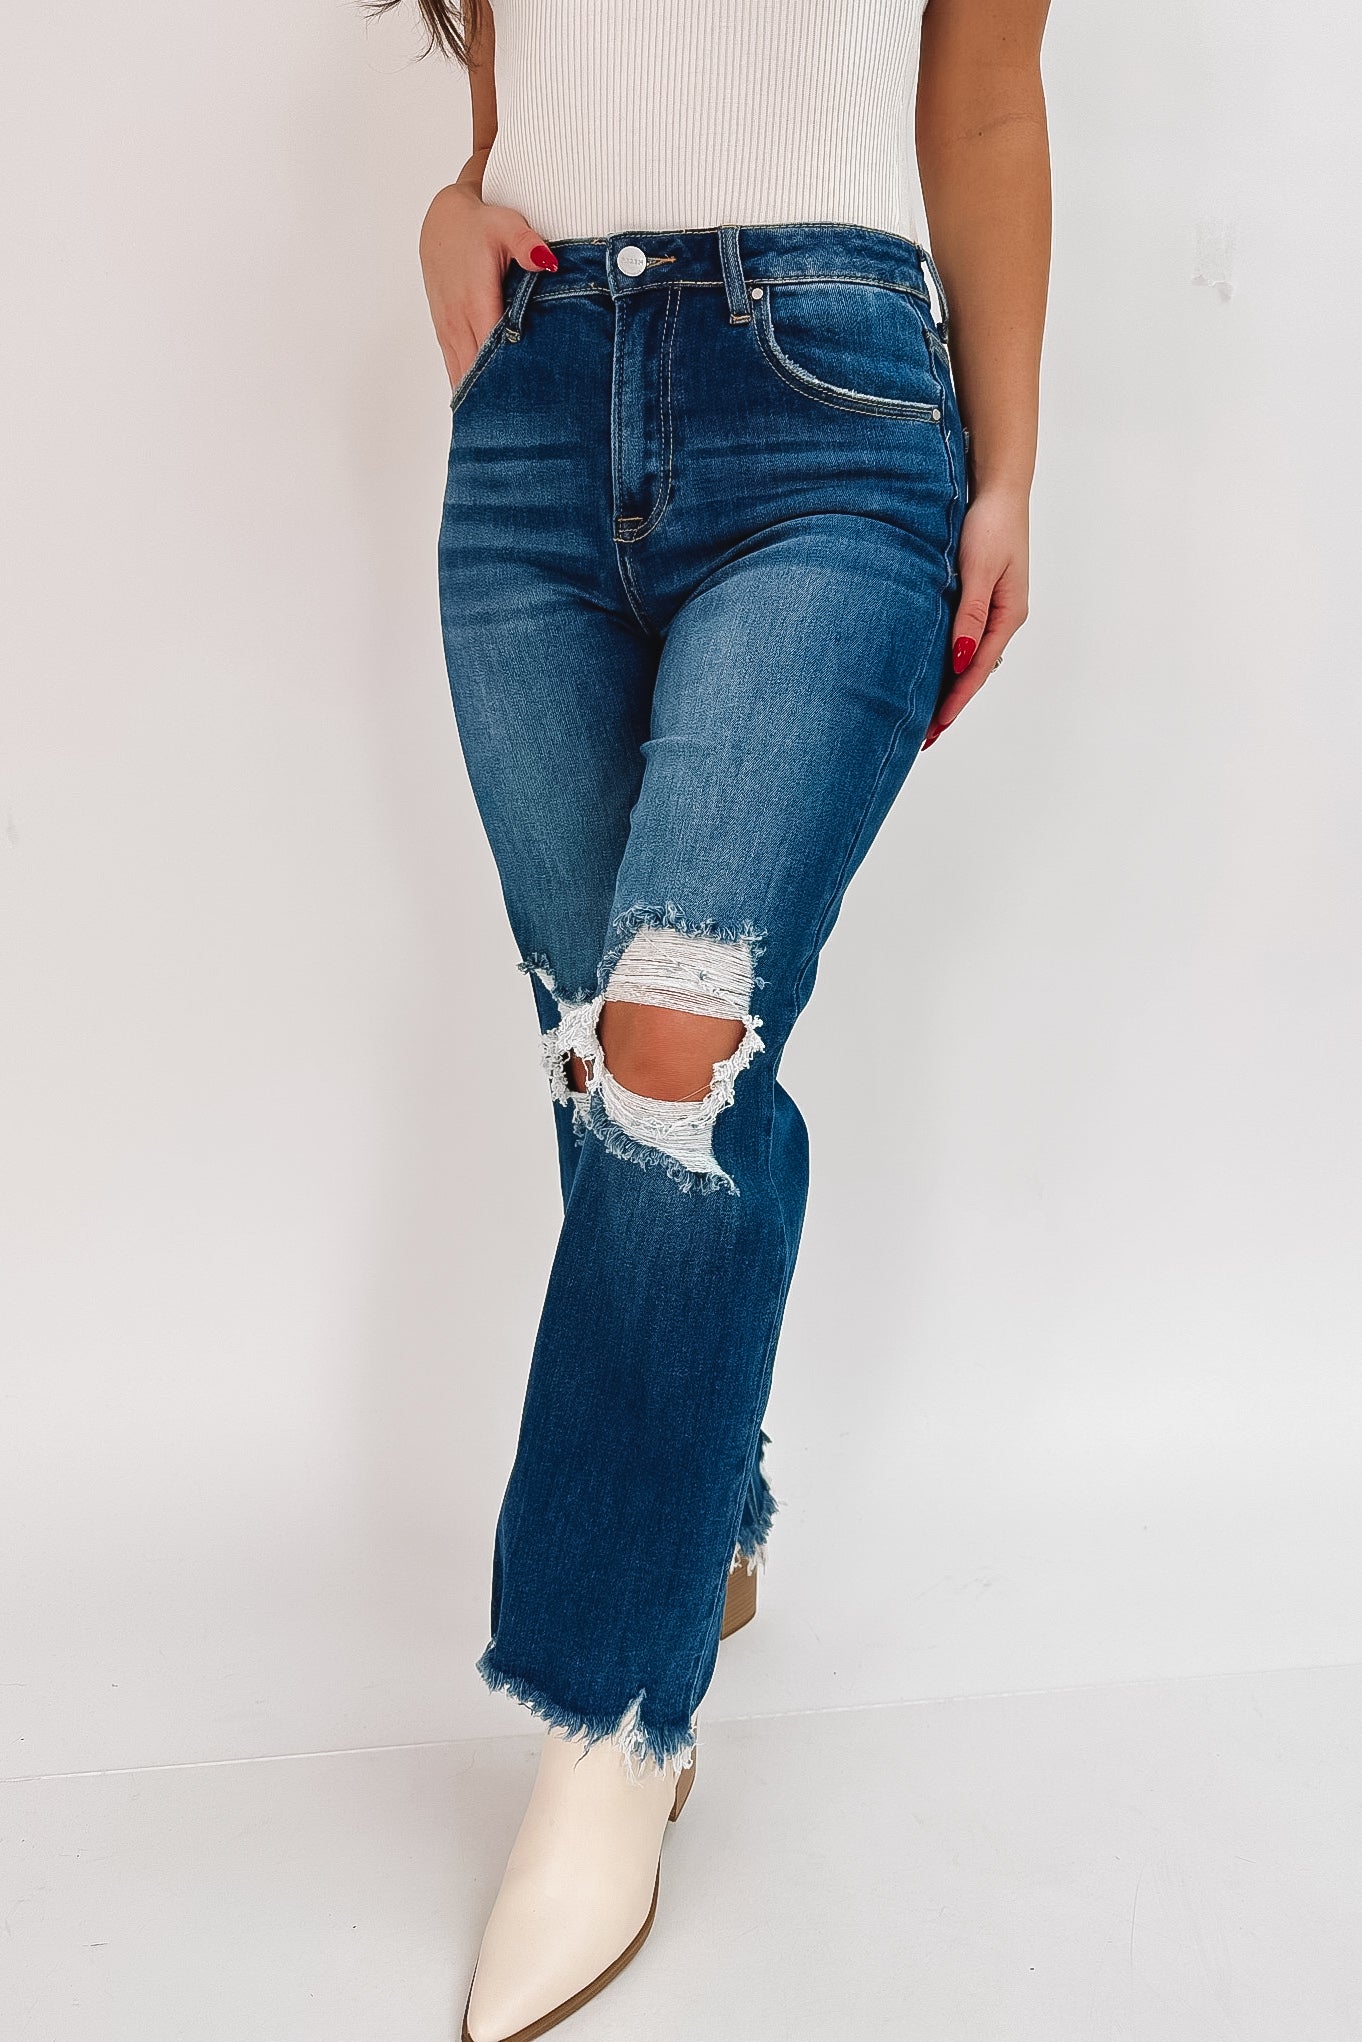 Number One Choice Crop Jeans